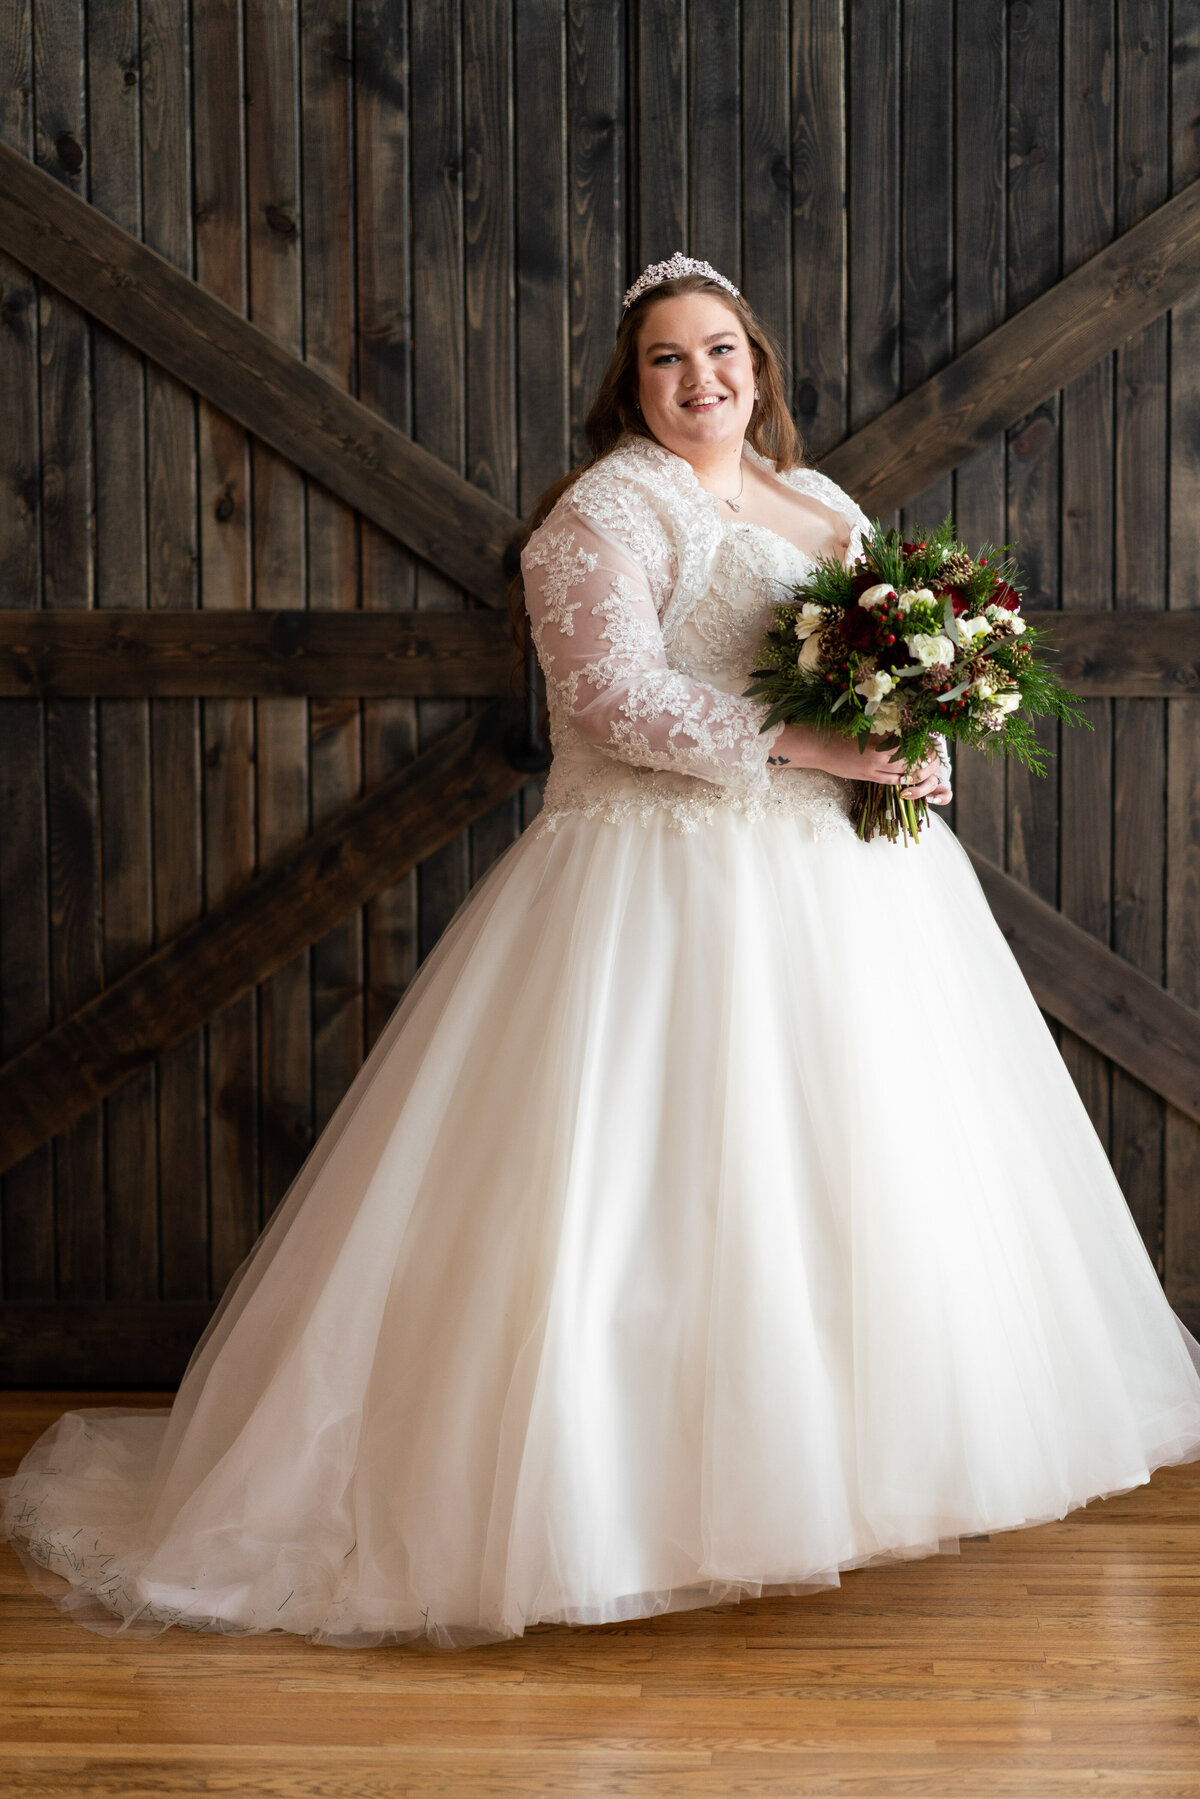 Plus size bride holds flowers and smiles at camera on wedding day.